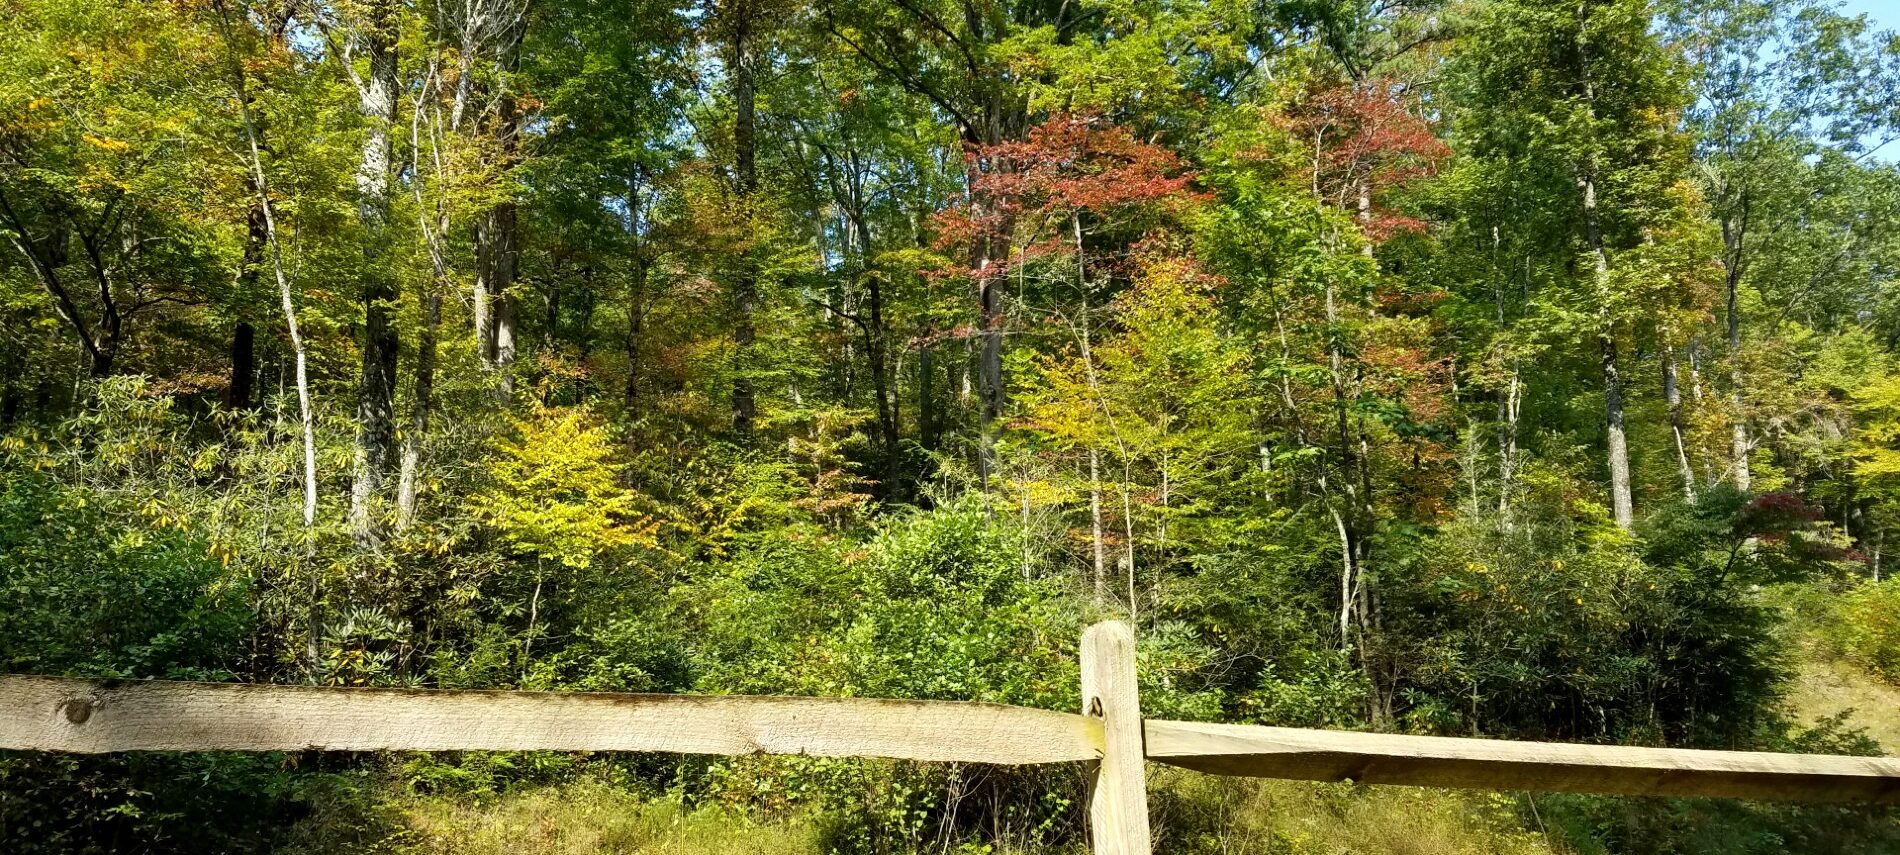 Split rail fence with tall trees behind it, some of which are showing fall foliage color